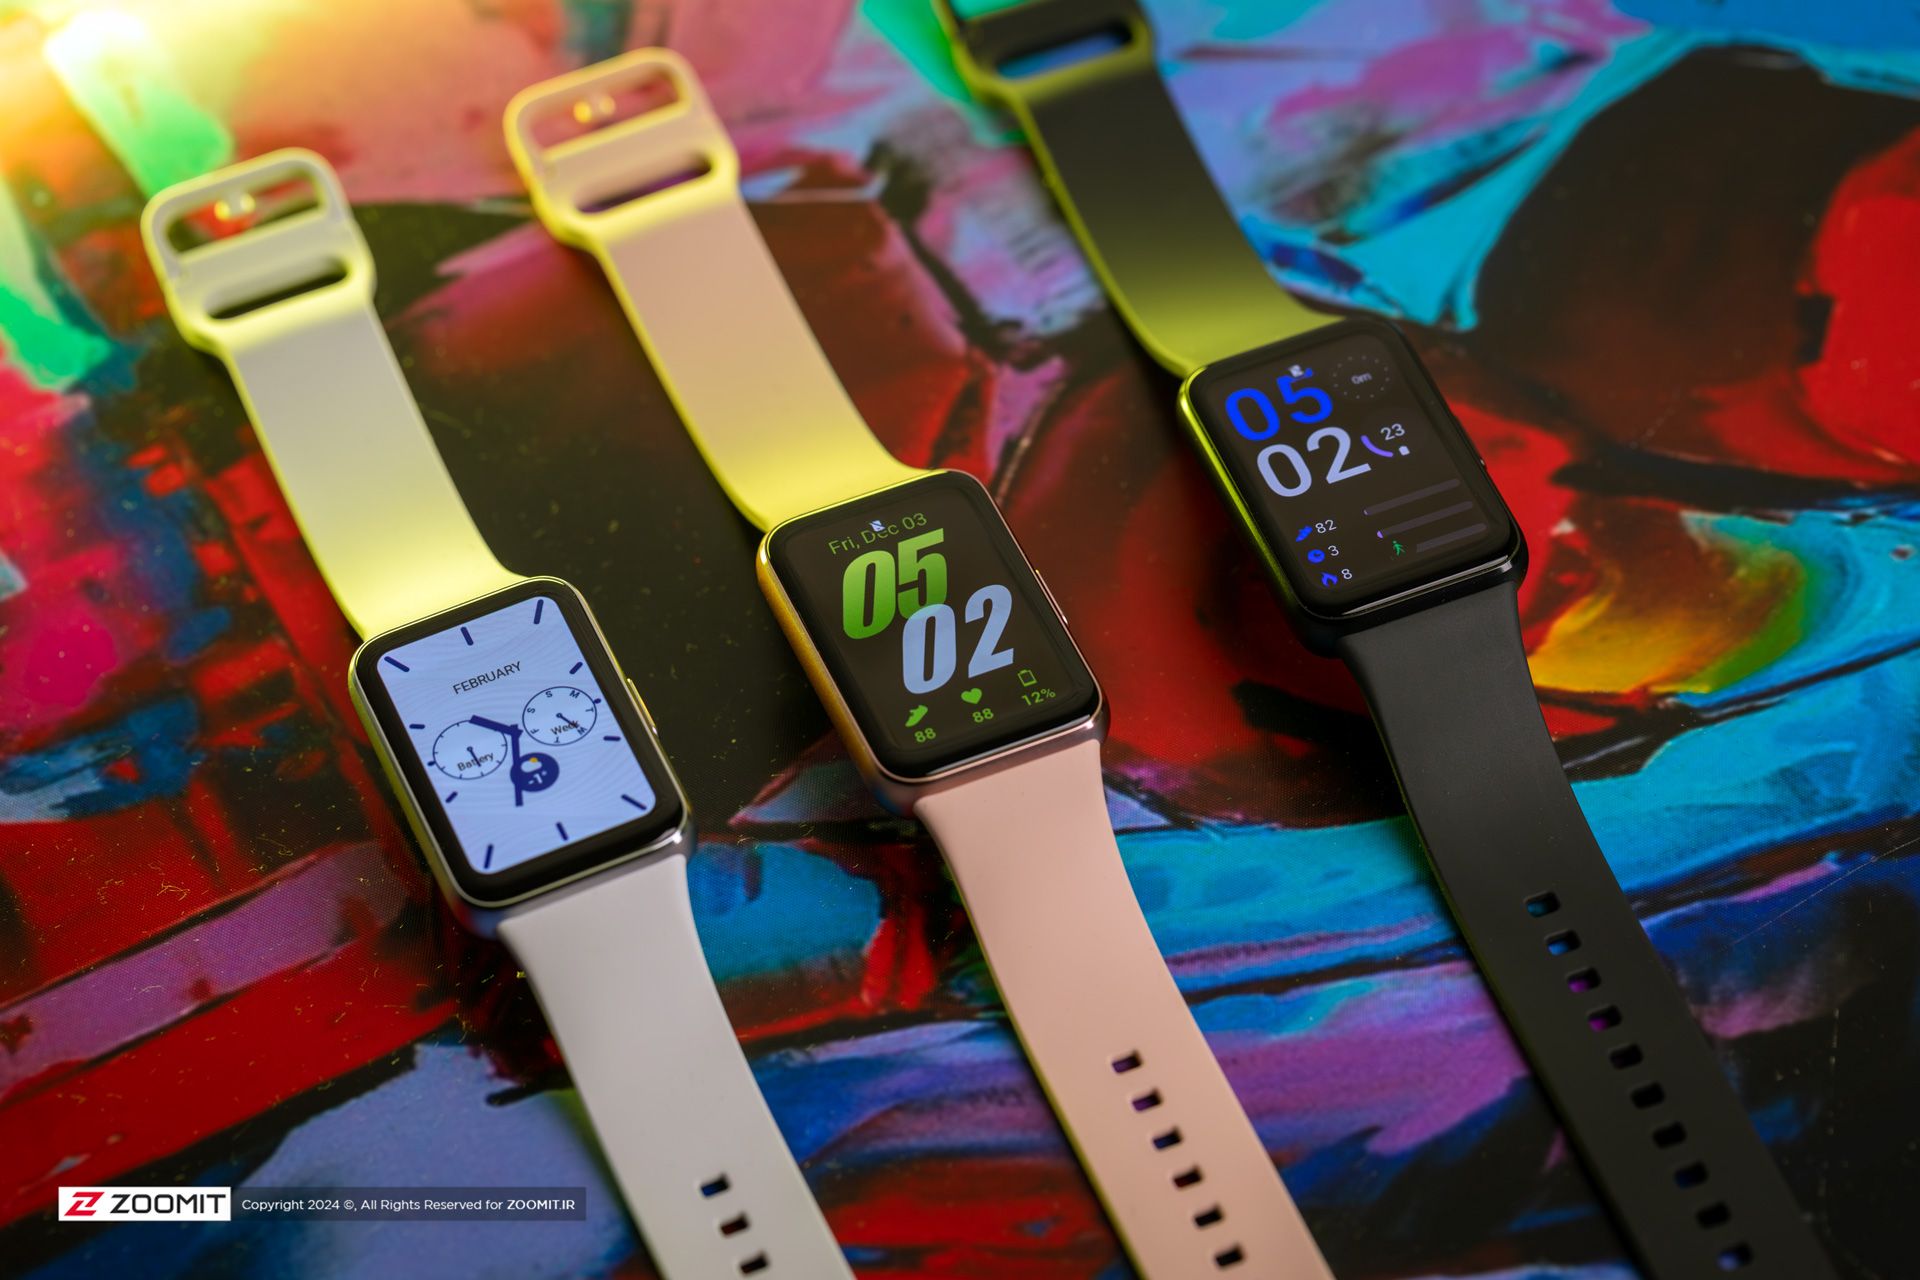 Samsung Galaxy Fit 3 in white, rose gold and black models together